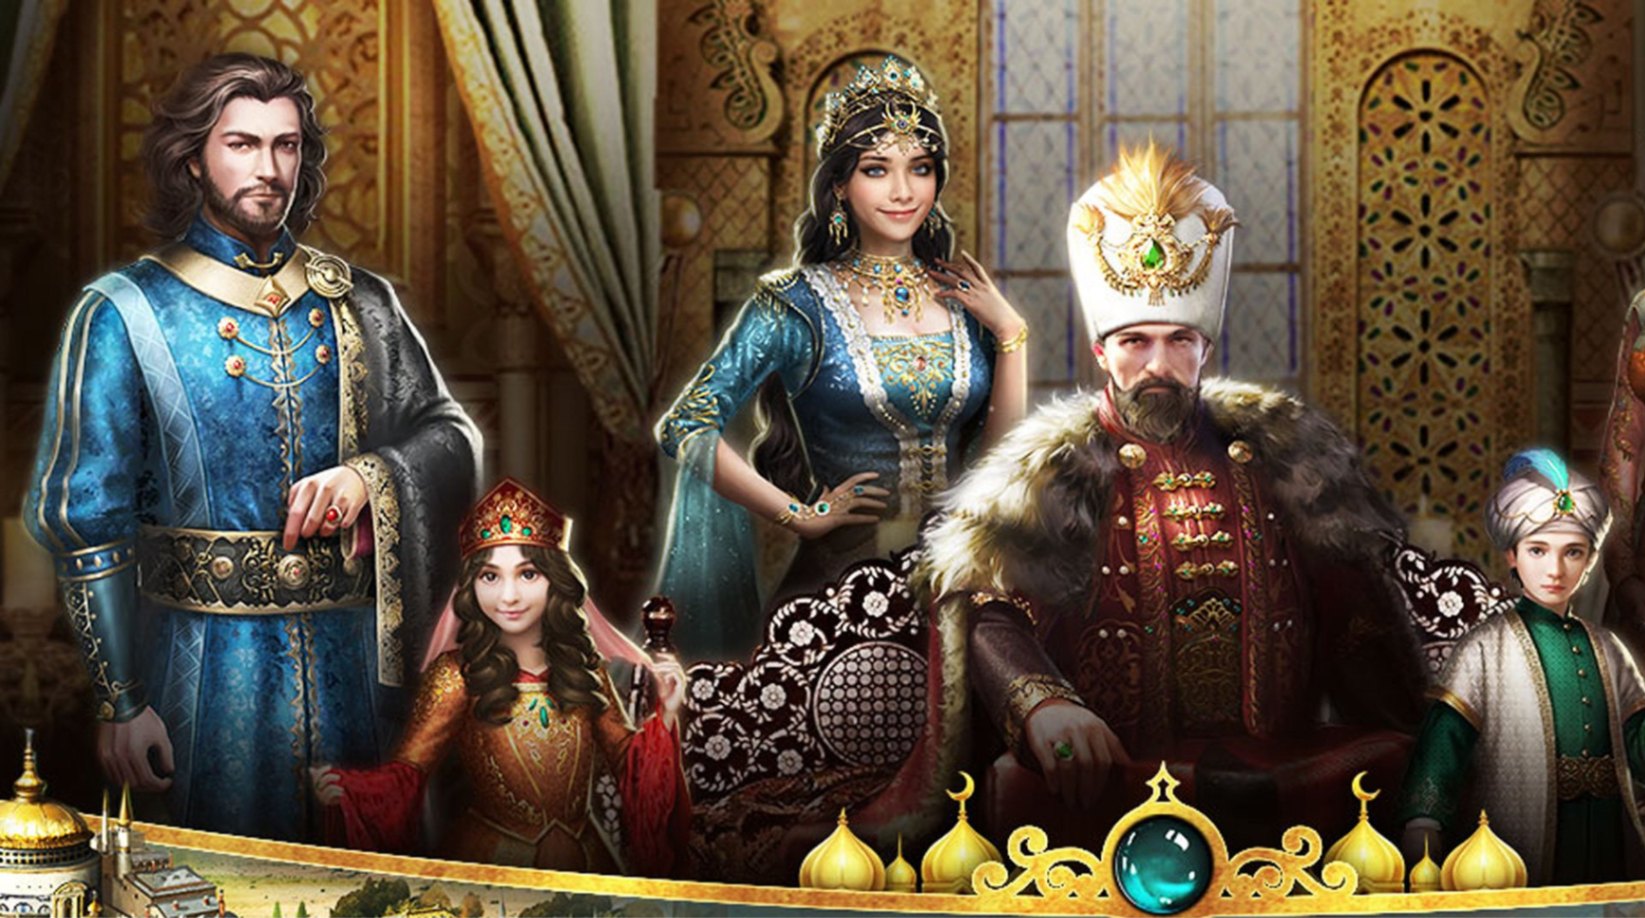 Game of Sultans - How to Get Money